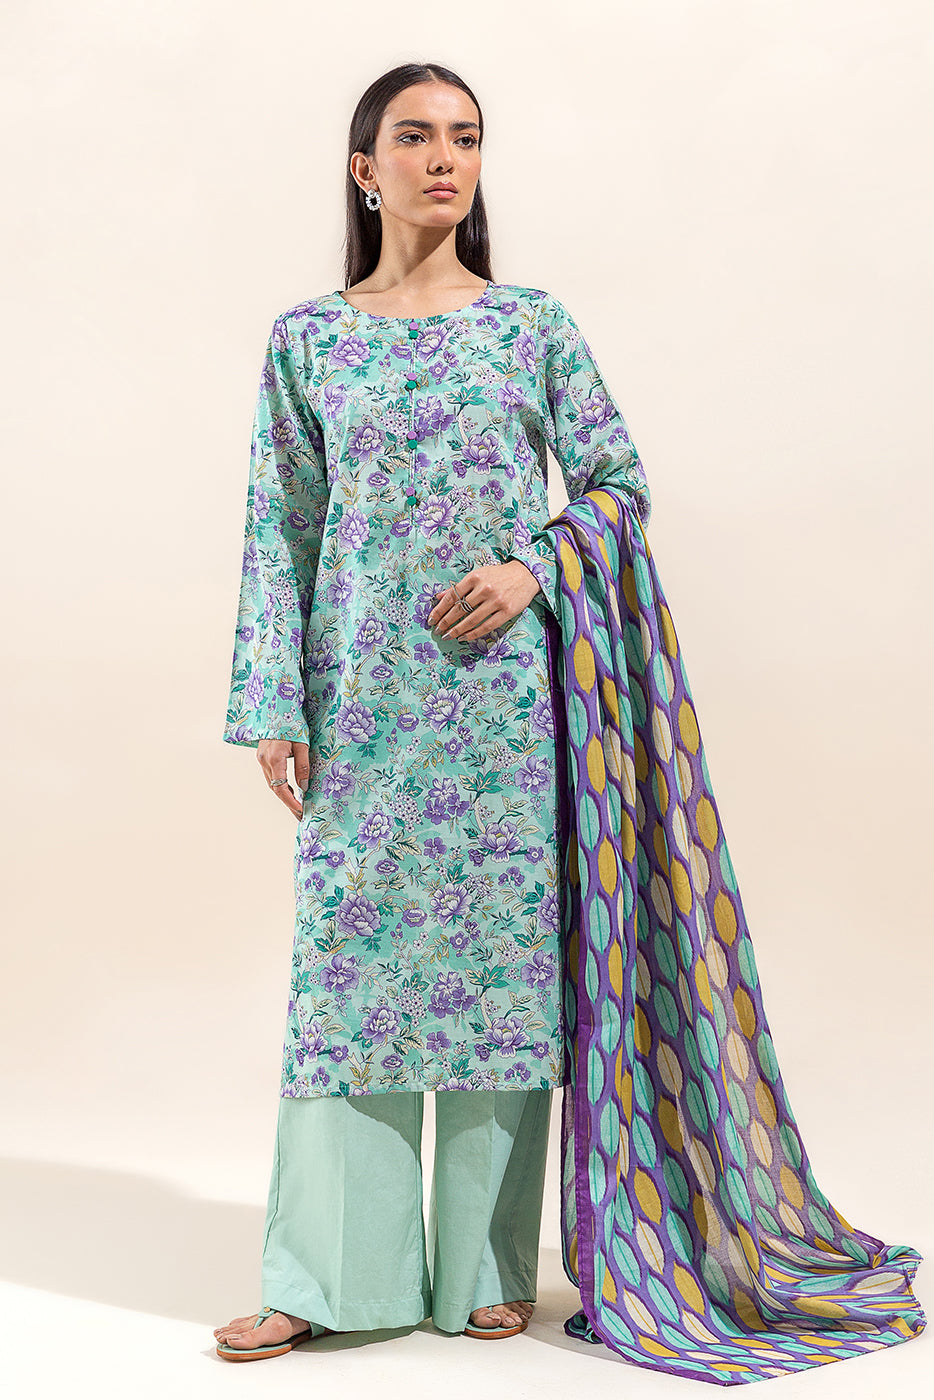 2 PIECE PRINTED LAWN SUIT-FLORET GLEAM (UNSTITCHED) - BEECHTREE